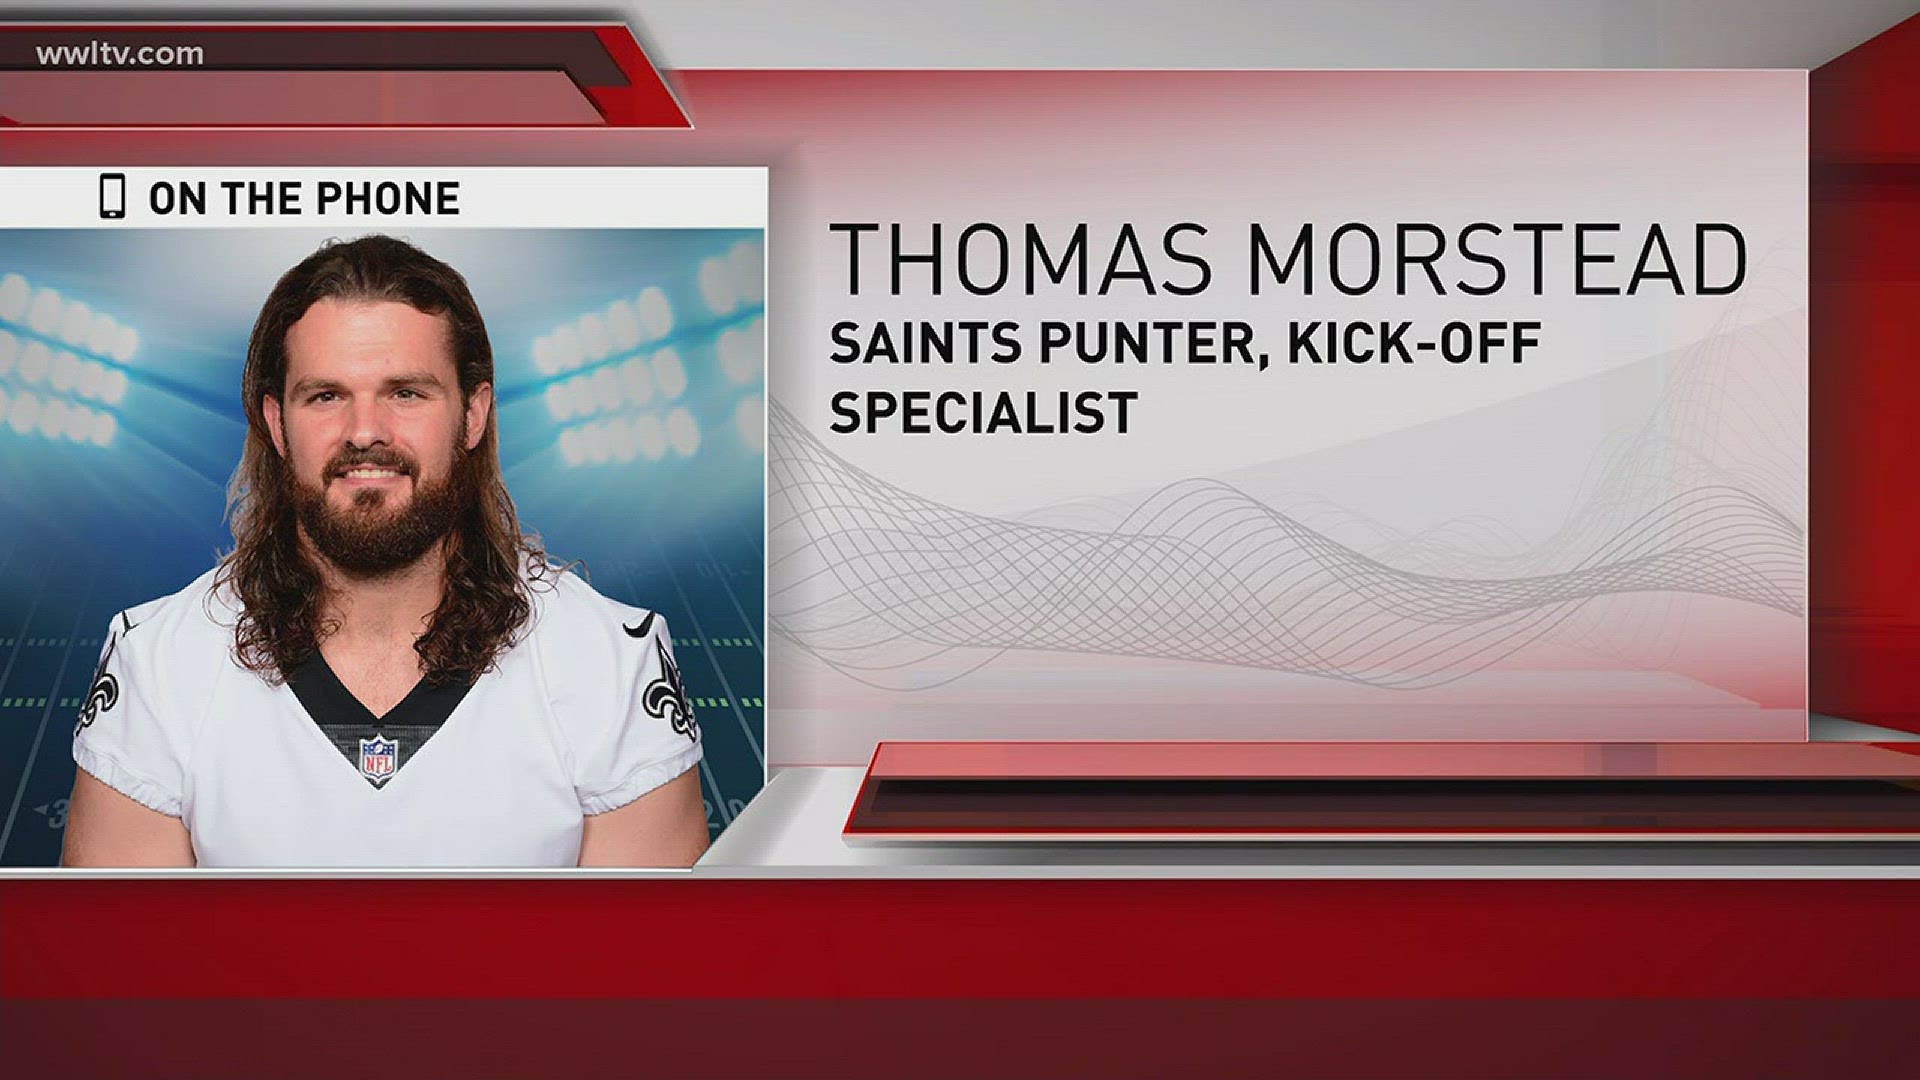 Saints' punter Thomas Morestead delivers more than $220,000 to Minnesota charities